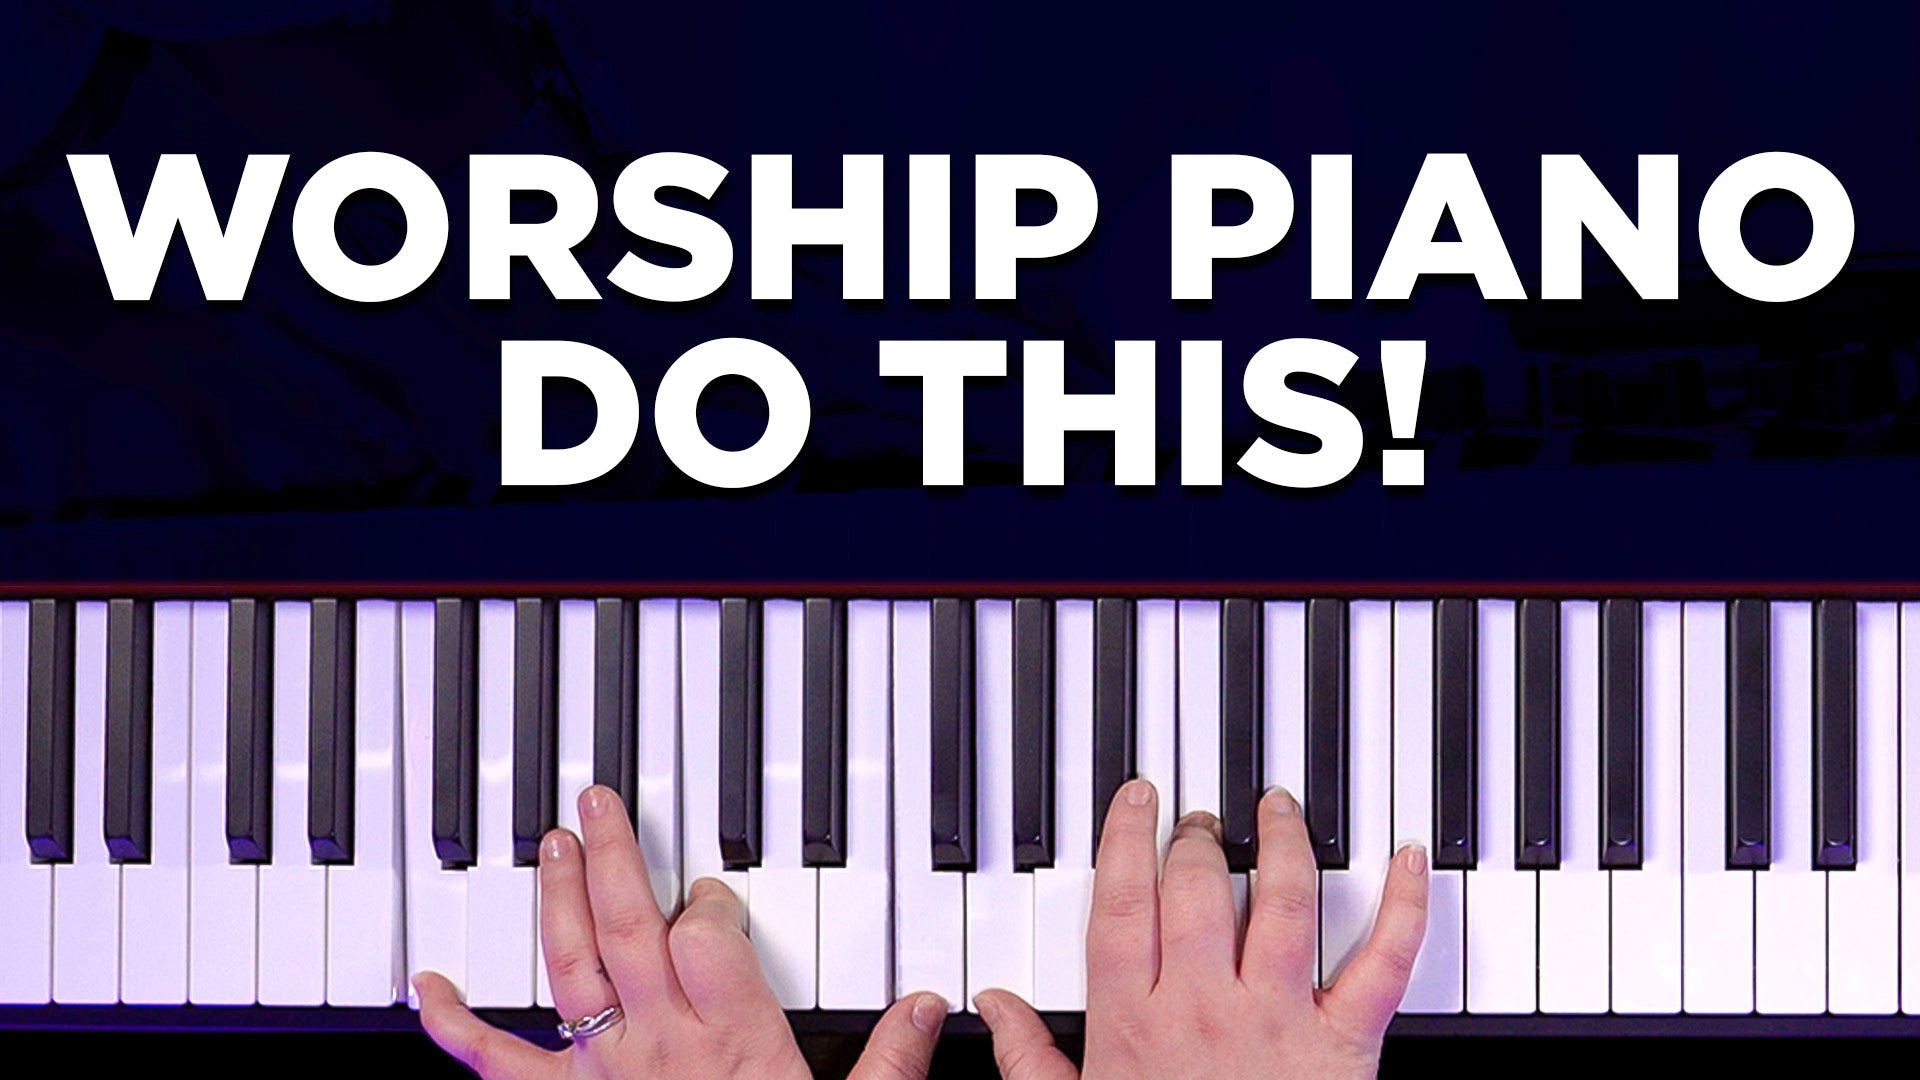 Tips Every Worship Piano Volunteer Should Know